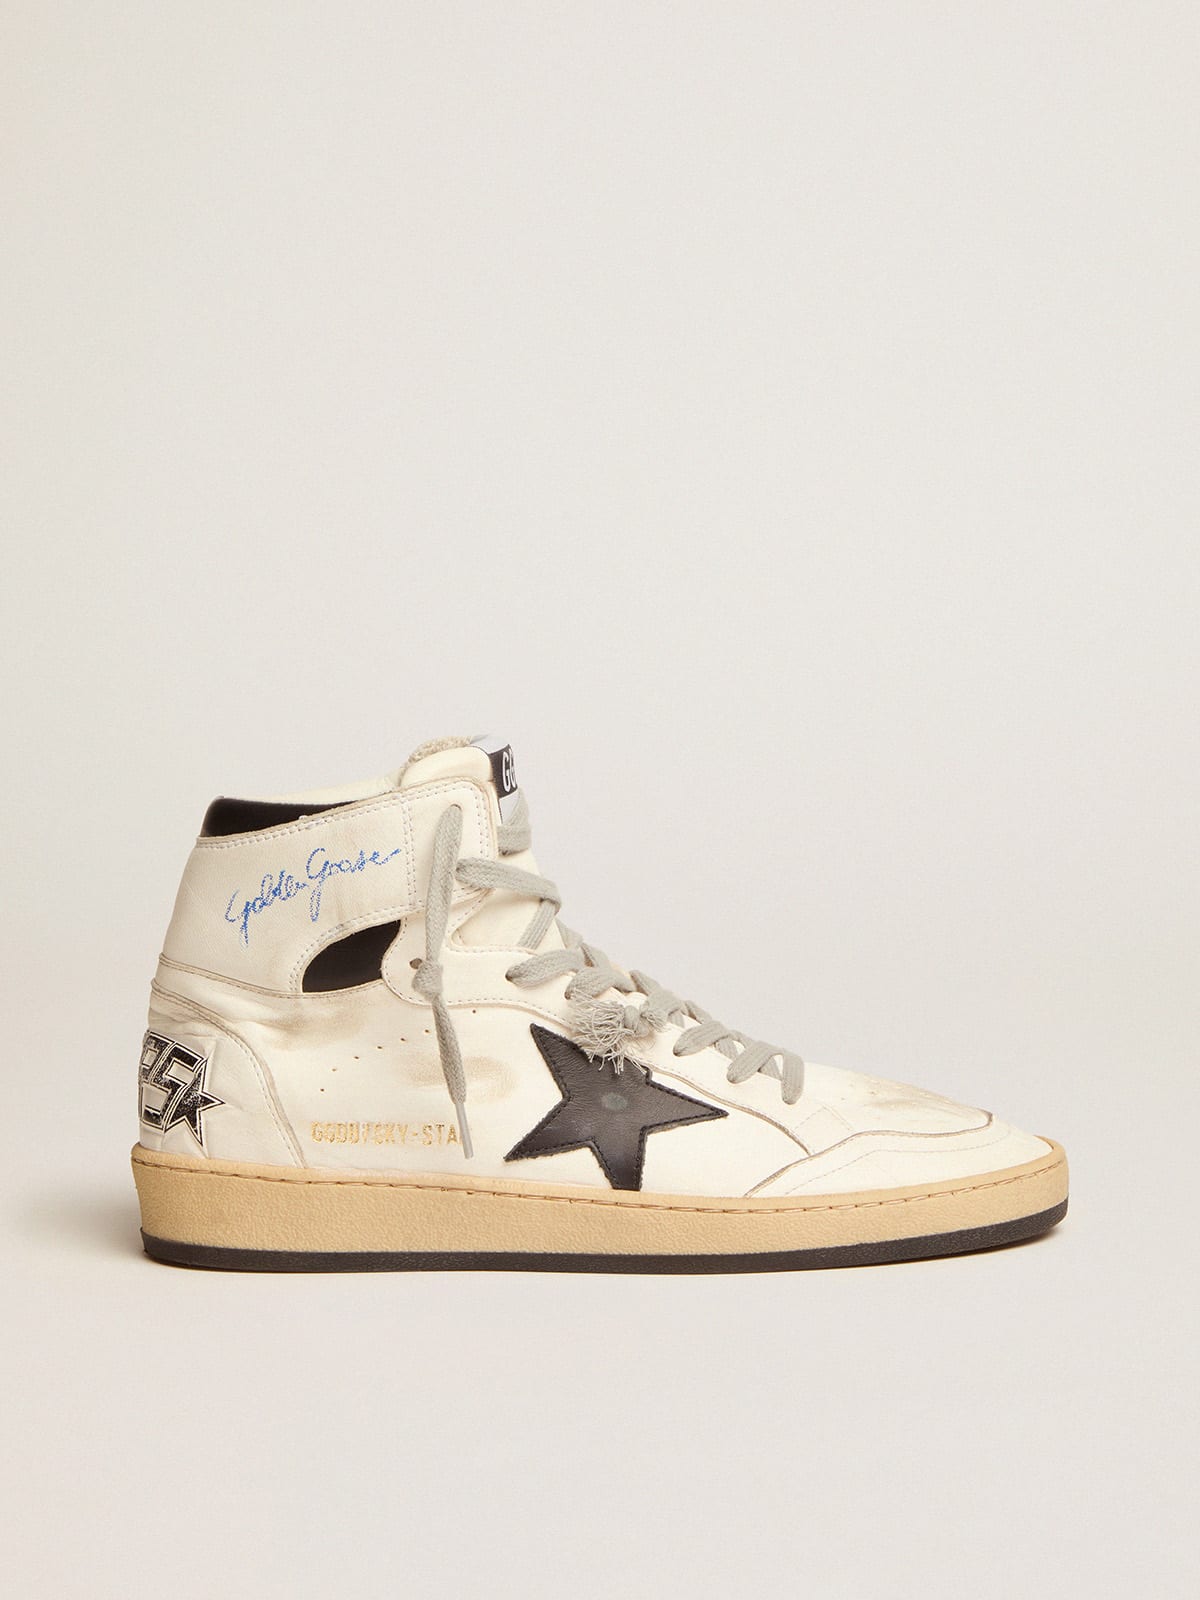 Men's Sky-Star sneakers with signature on the ankle and black leather inserts